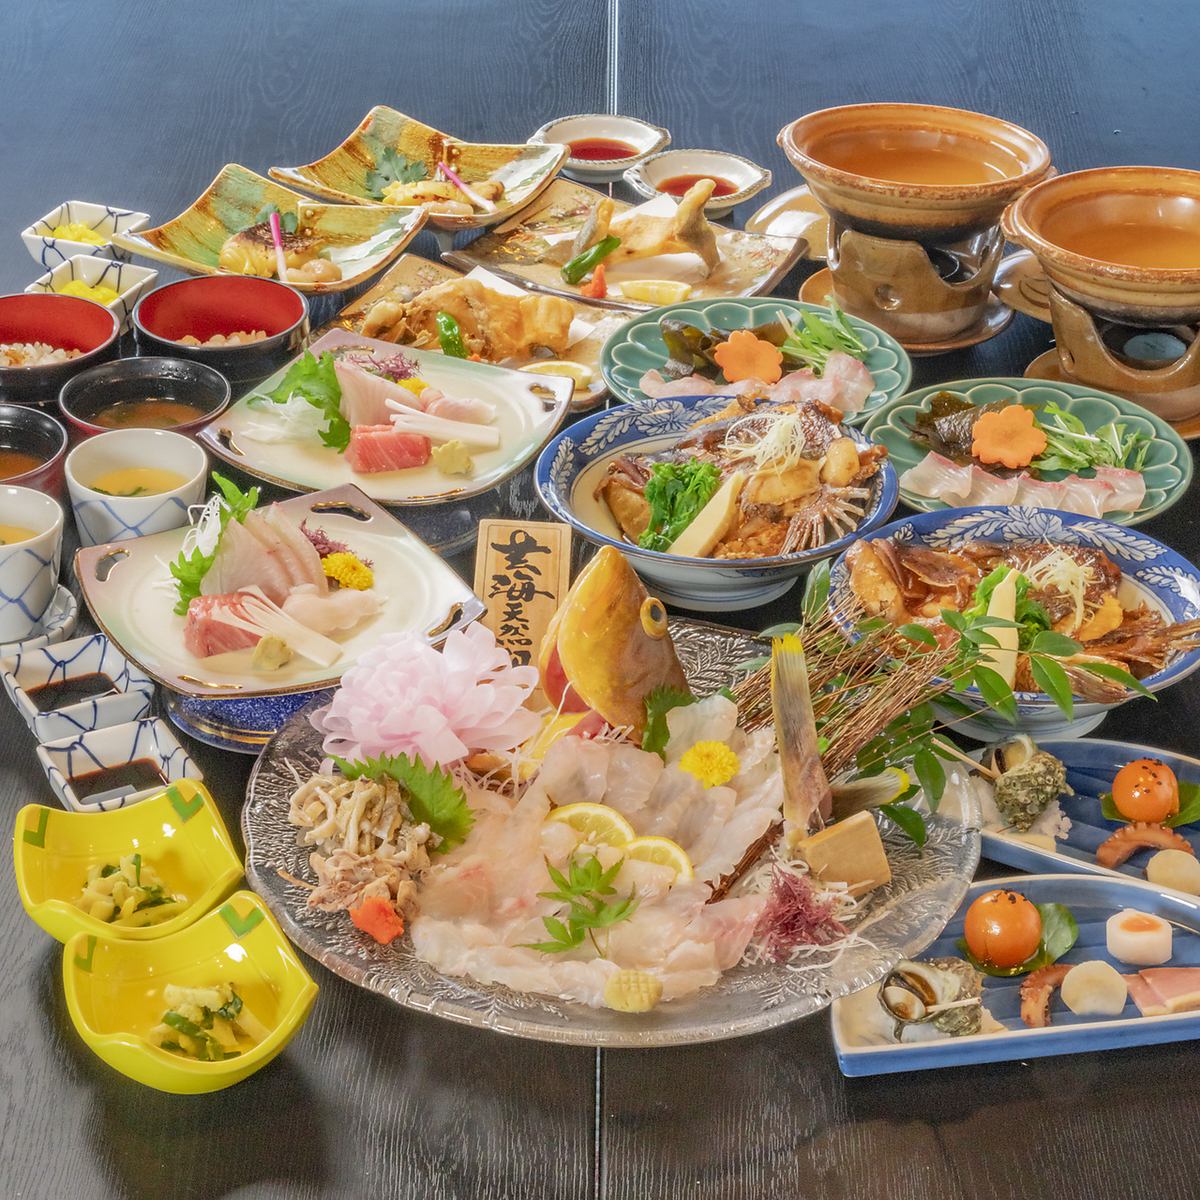 We are proud of our dishes that use plenty of seafood and blessings from the Genkai Sea.